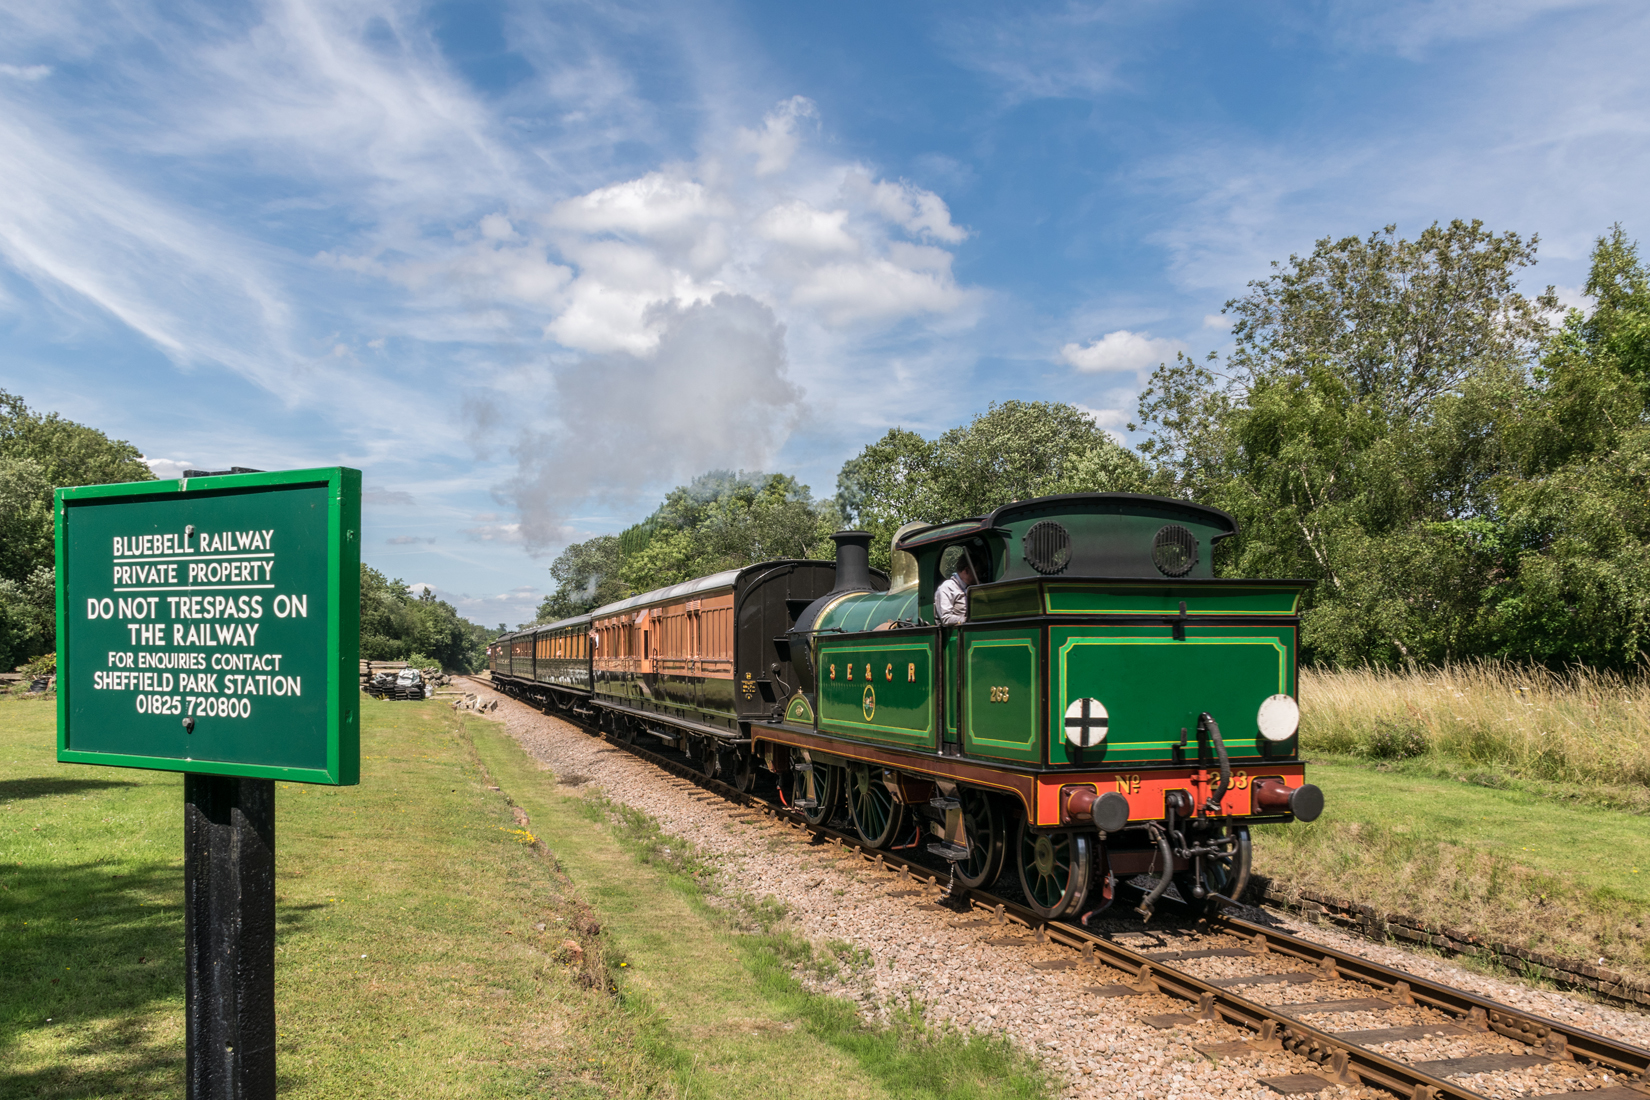 South Eastern & Chatham Railway, H-class 0-4-4T, No.263 heading south past the site of former West Hoathly station